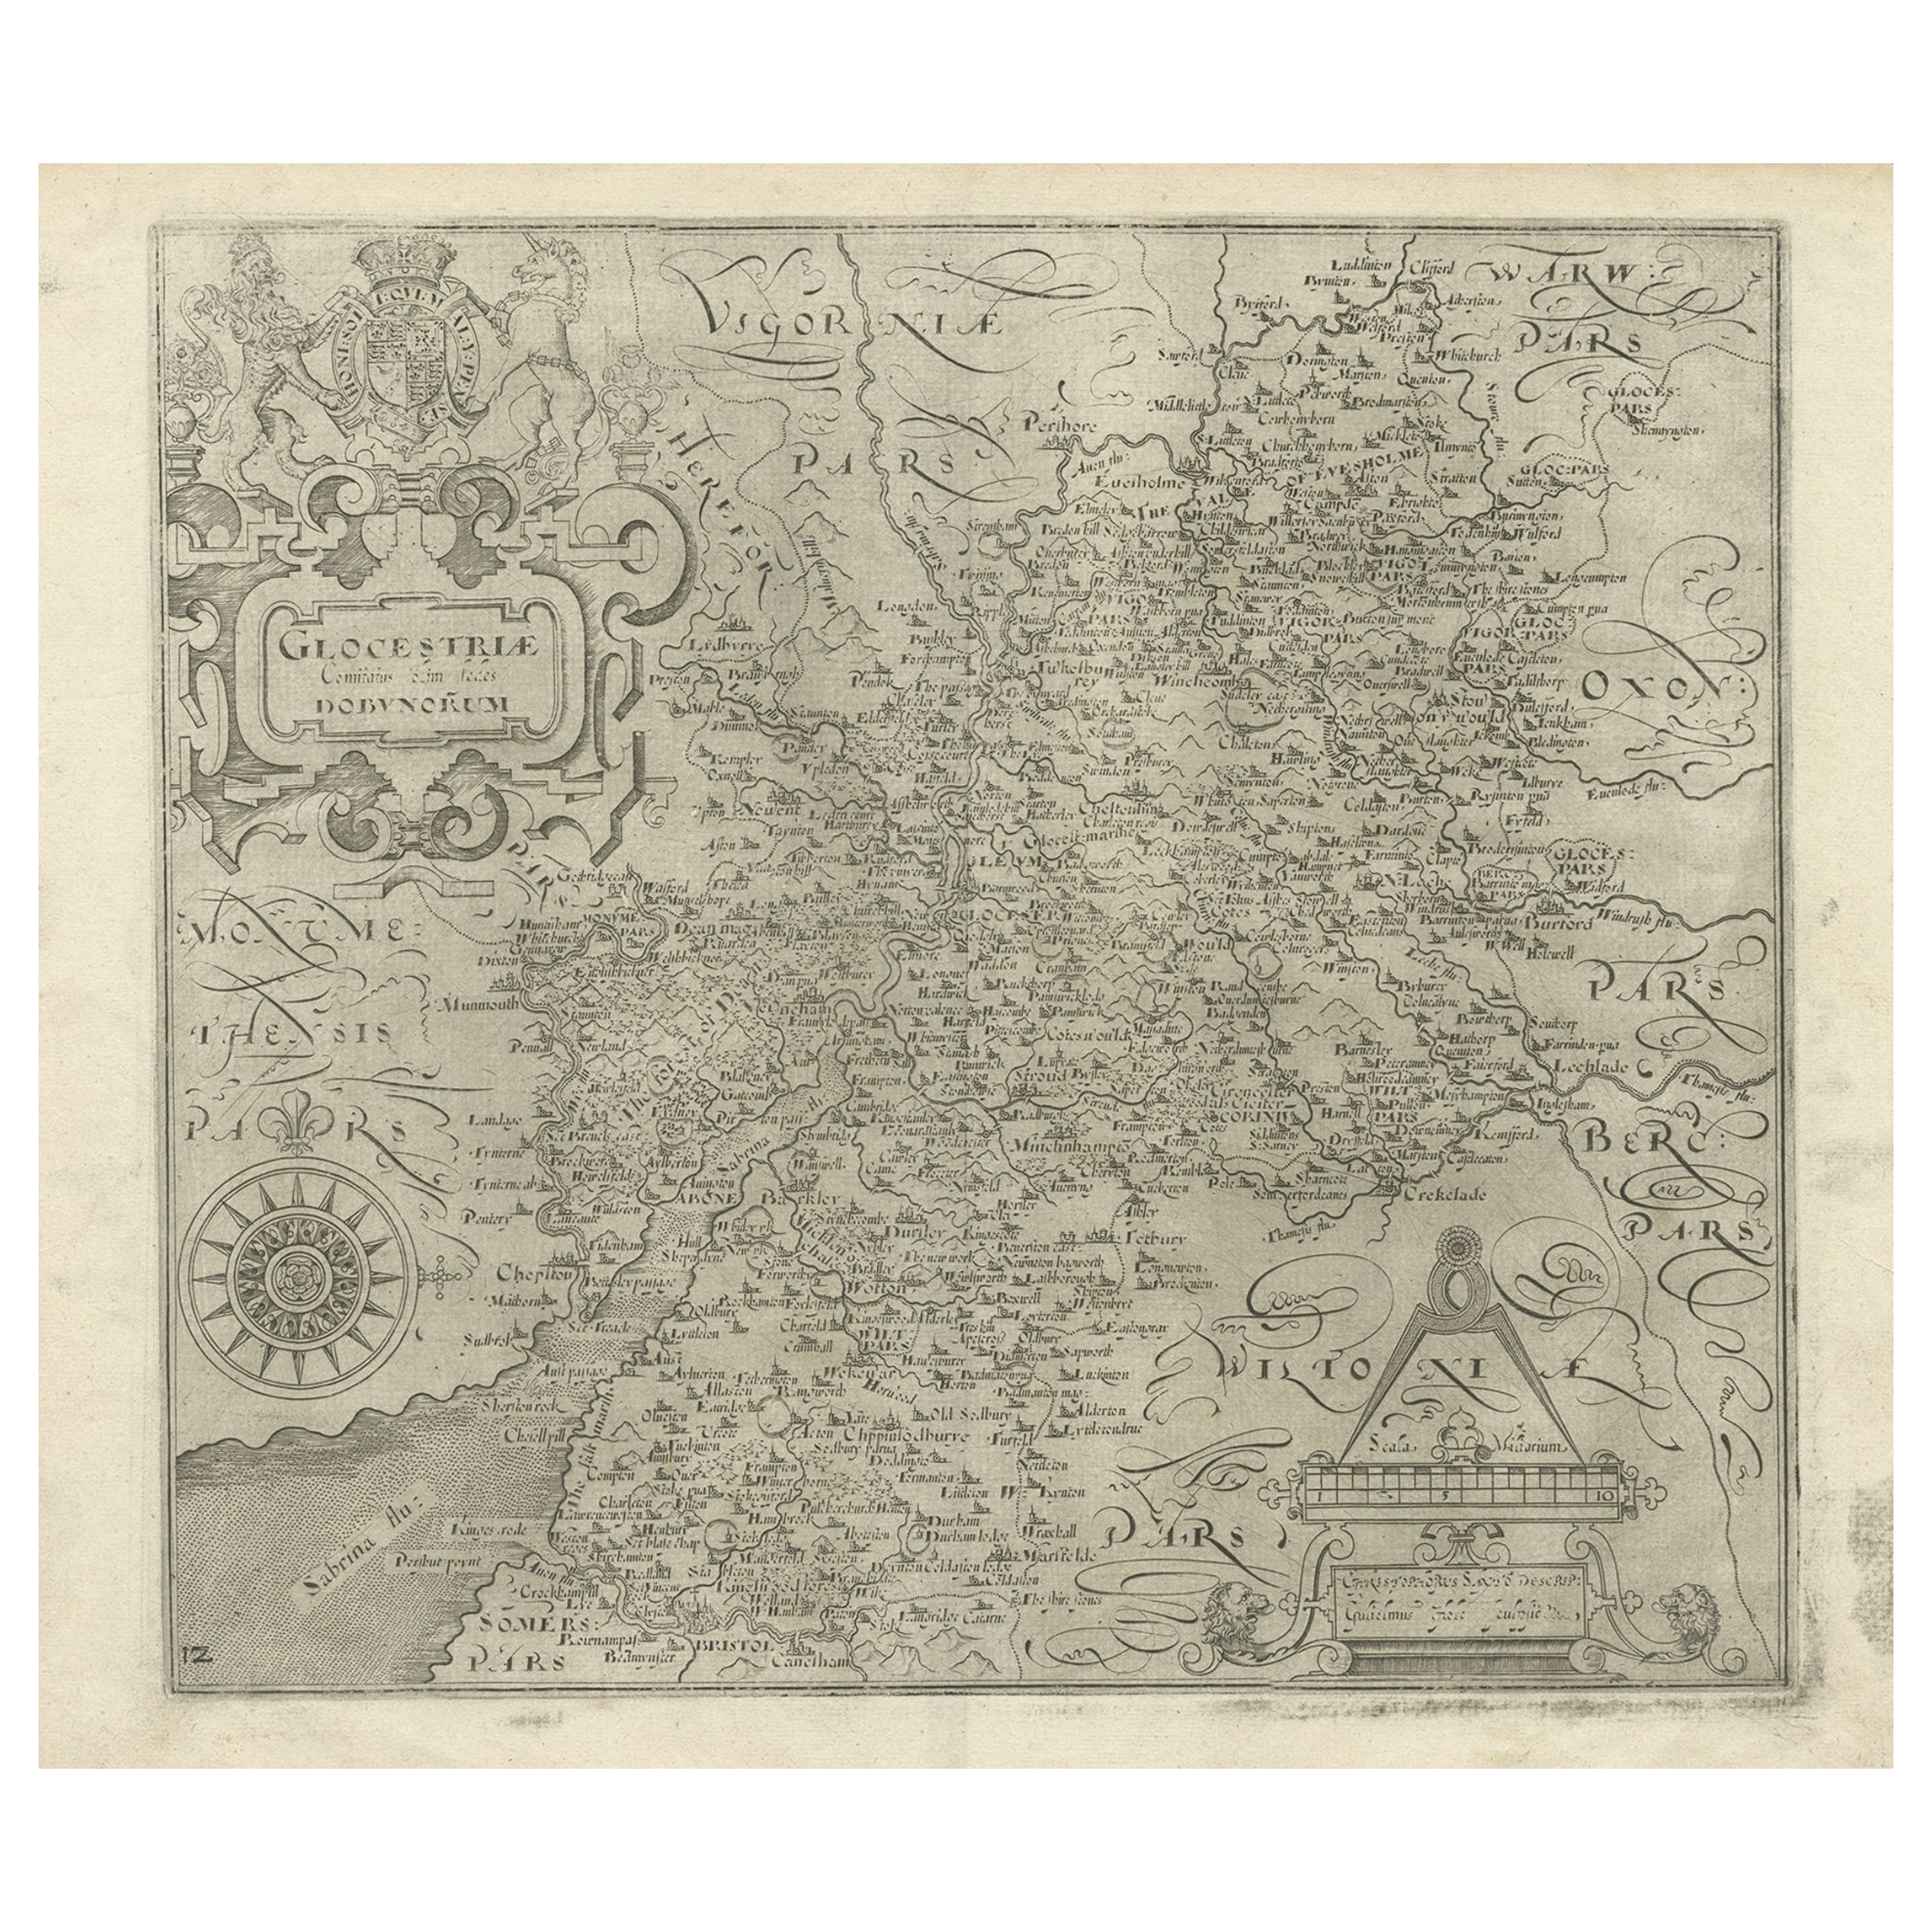 Antique Copper Engraved Map of Gloucestershire in England, 1637